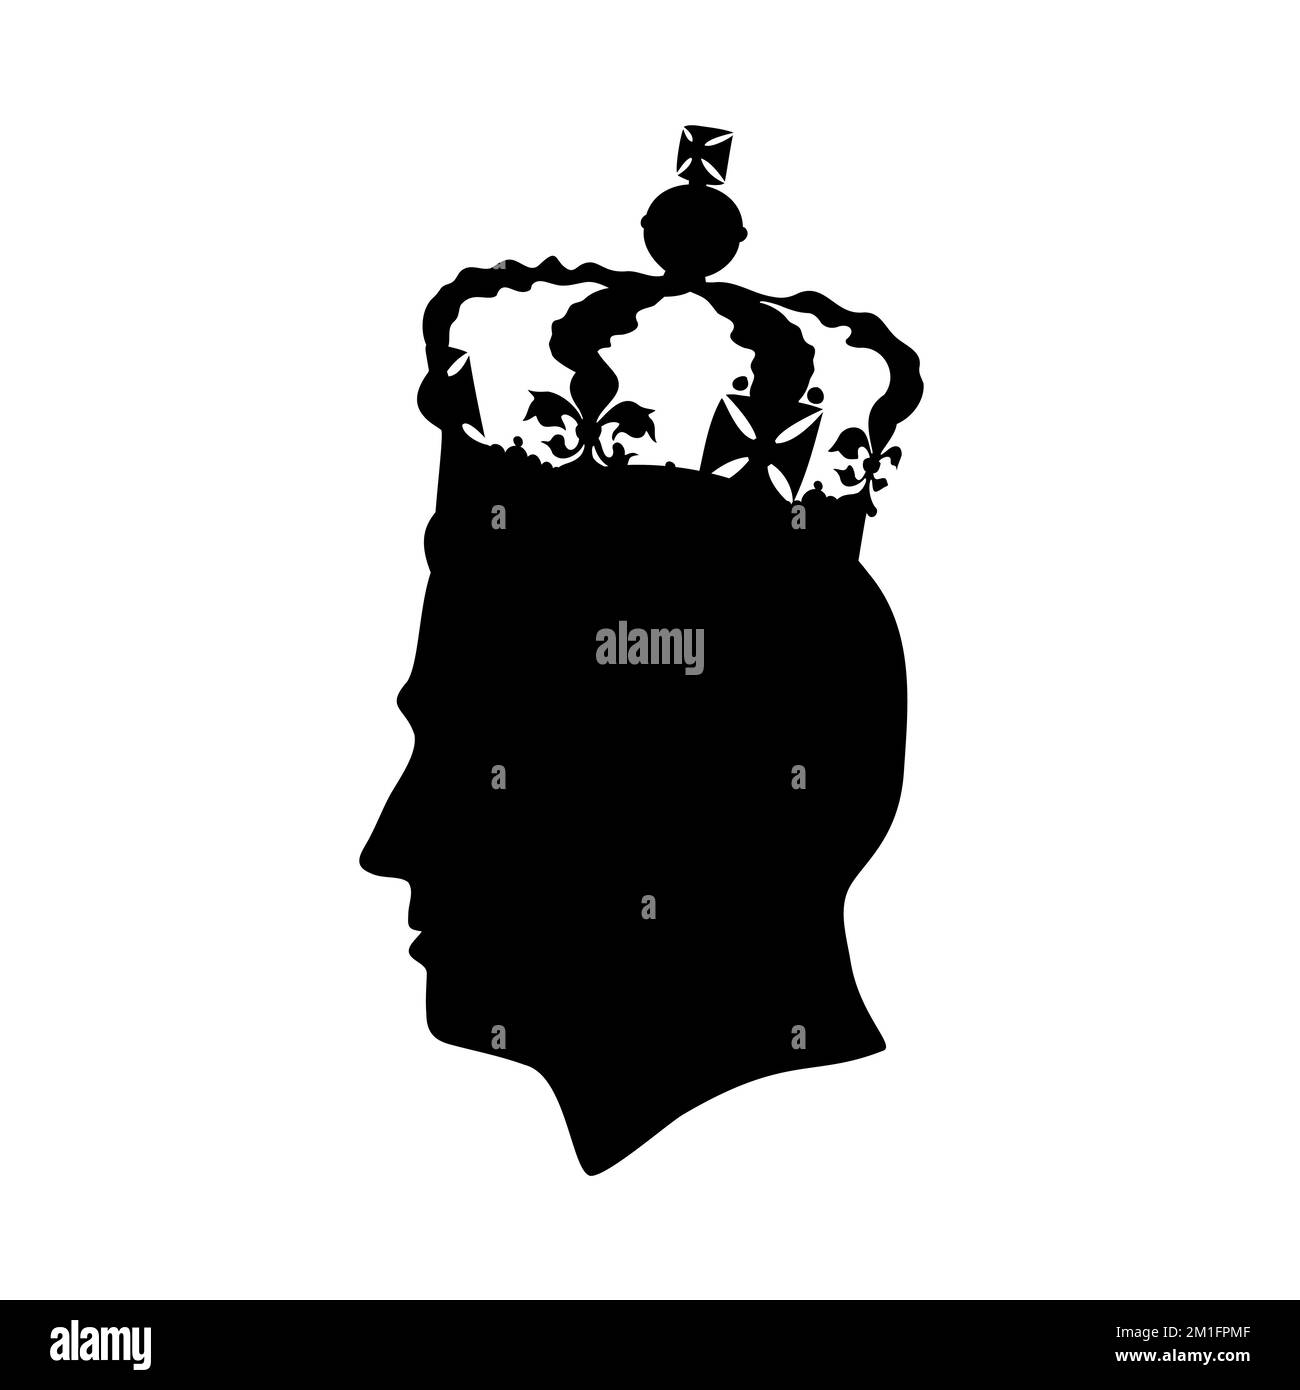 Silhouette of King Charles III portrait profile. The British monarch in St Edward Crown. Head side view. Vector illustration. Stock Vector